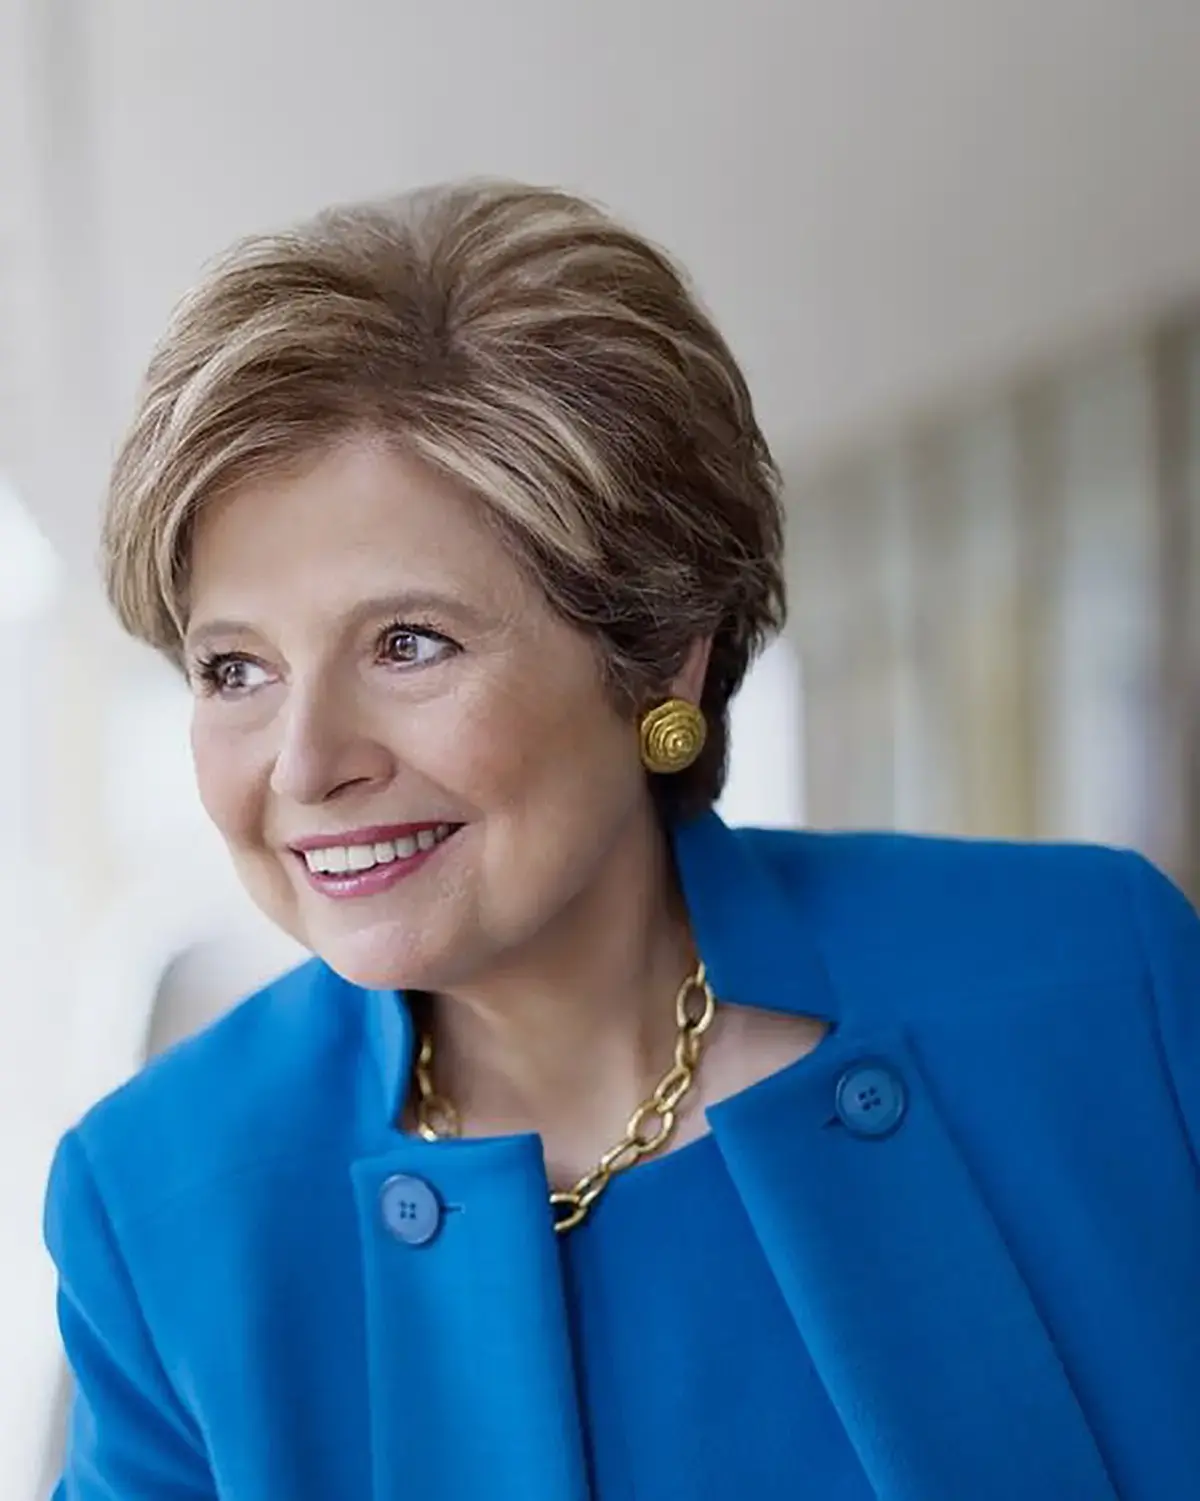 Woman with short blonde hair and blue suit smiling, with white background